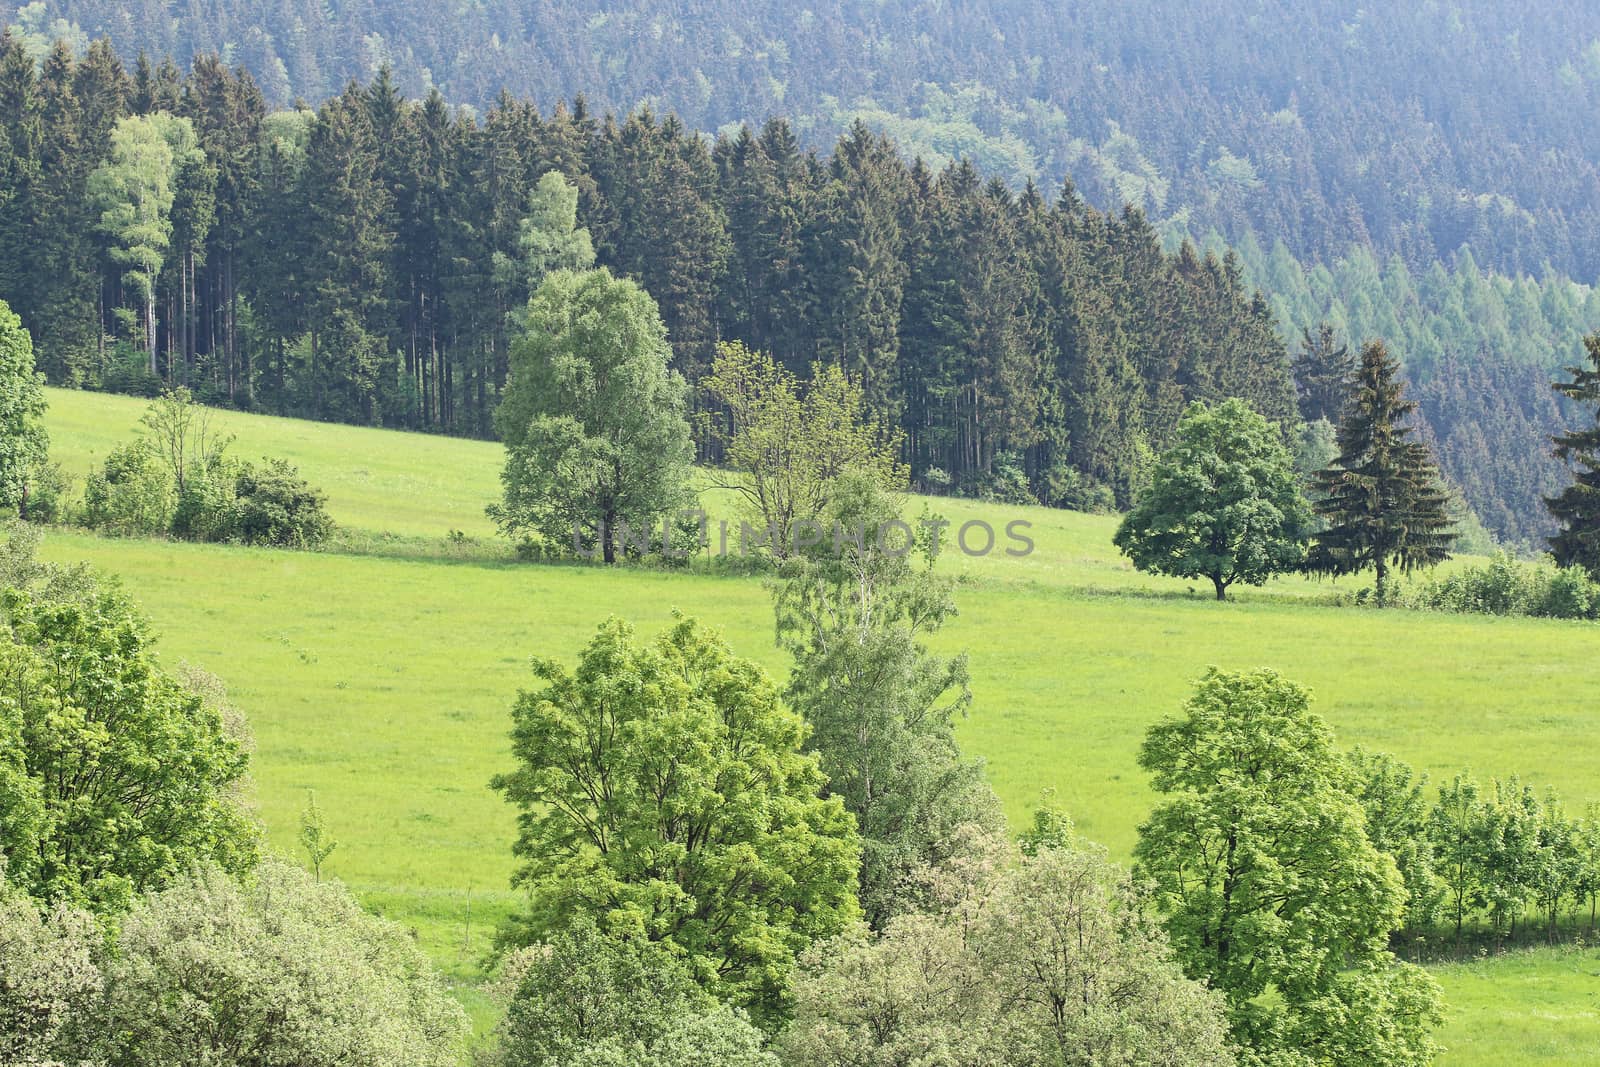 Image of landscape - meadows and forests